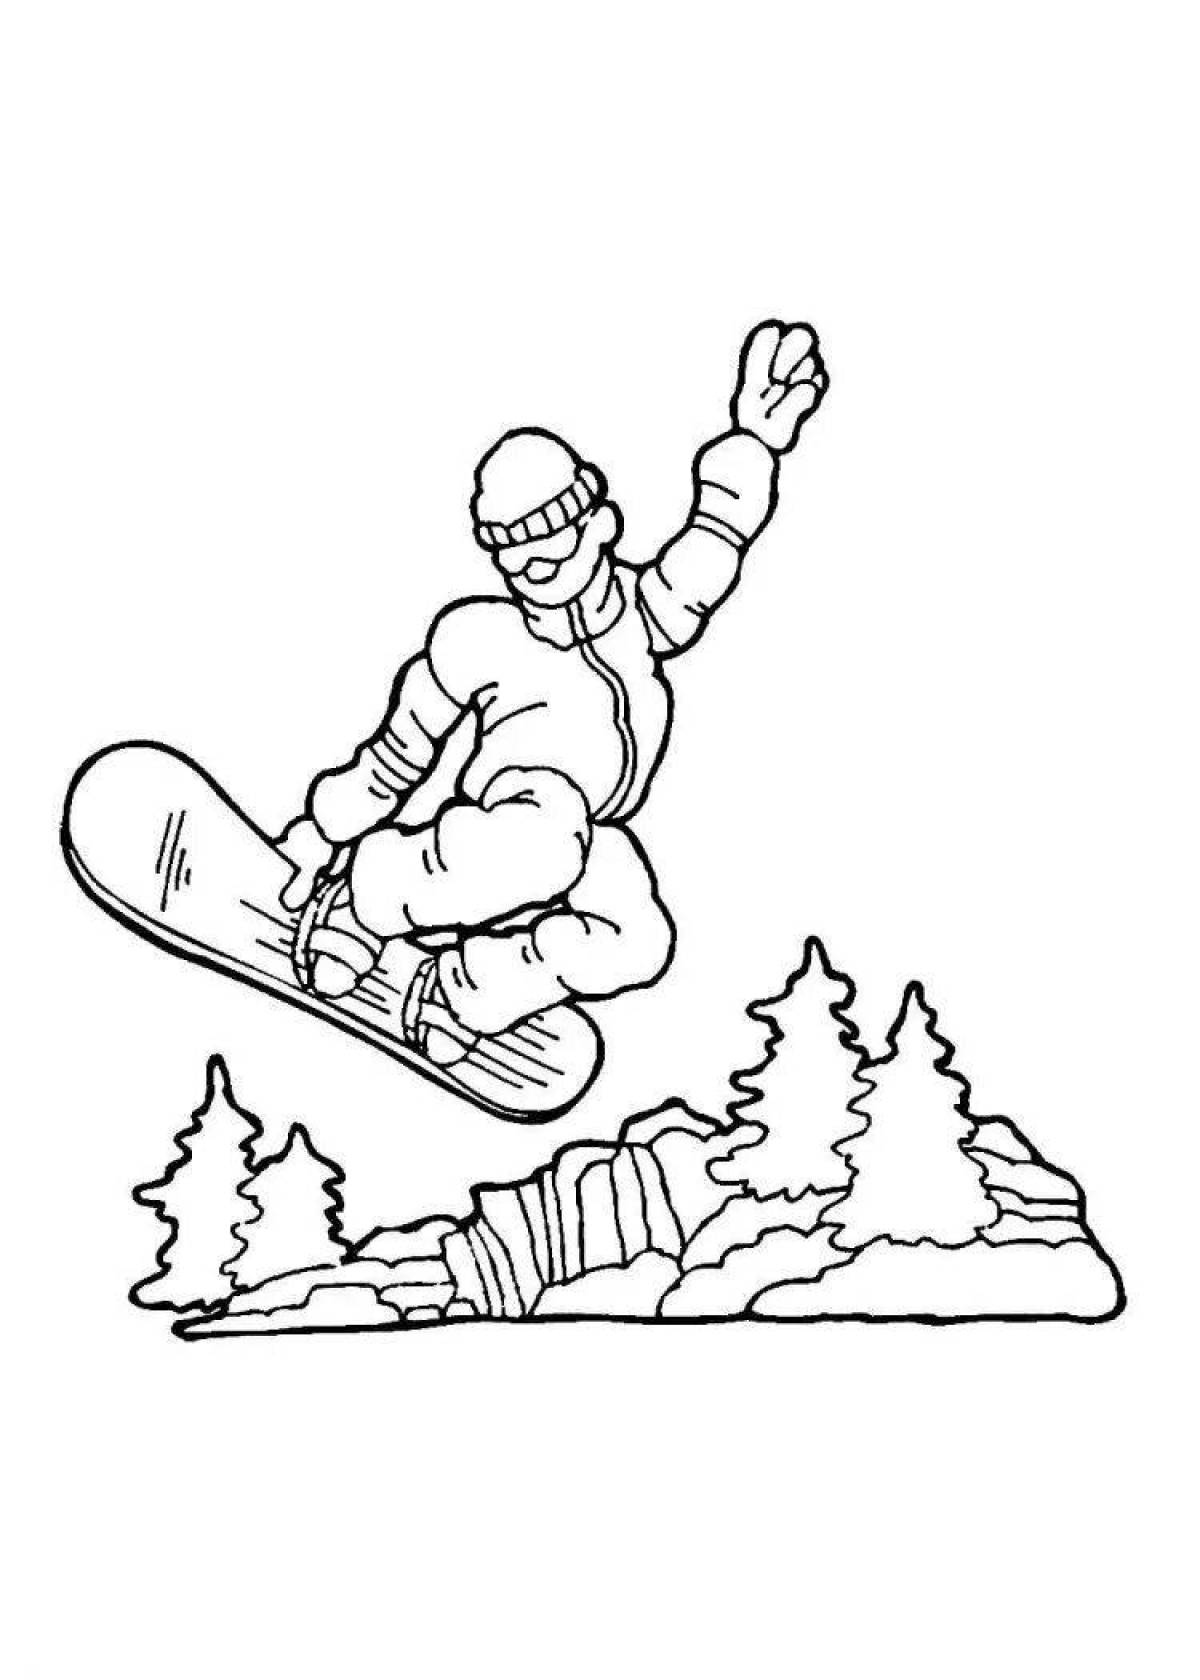 Fun coloring book winter sports for kids